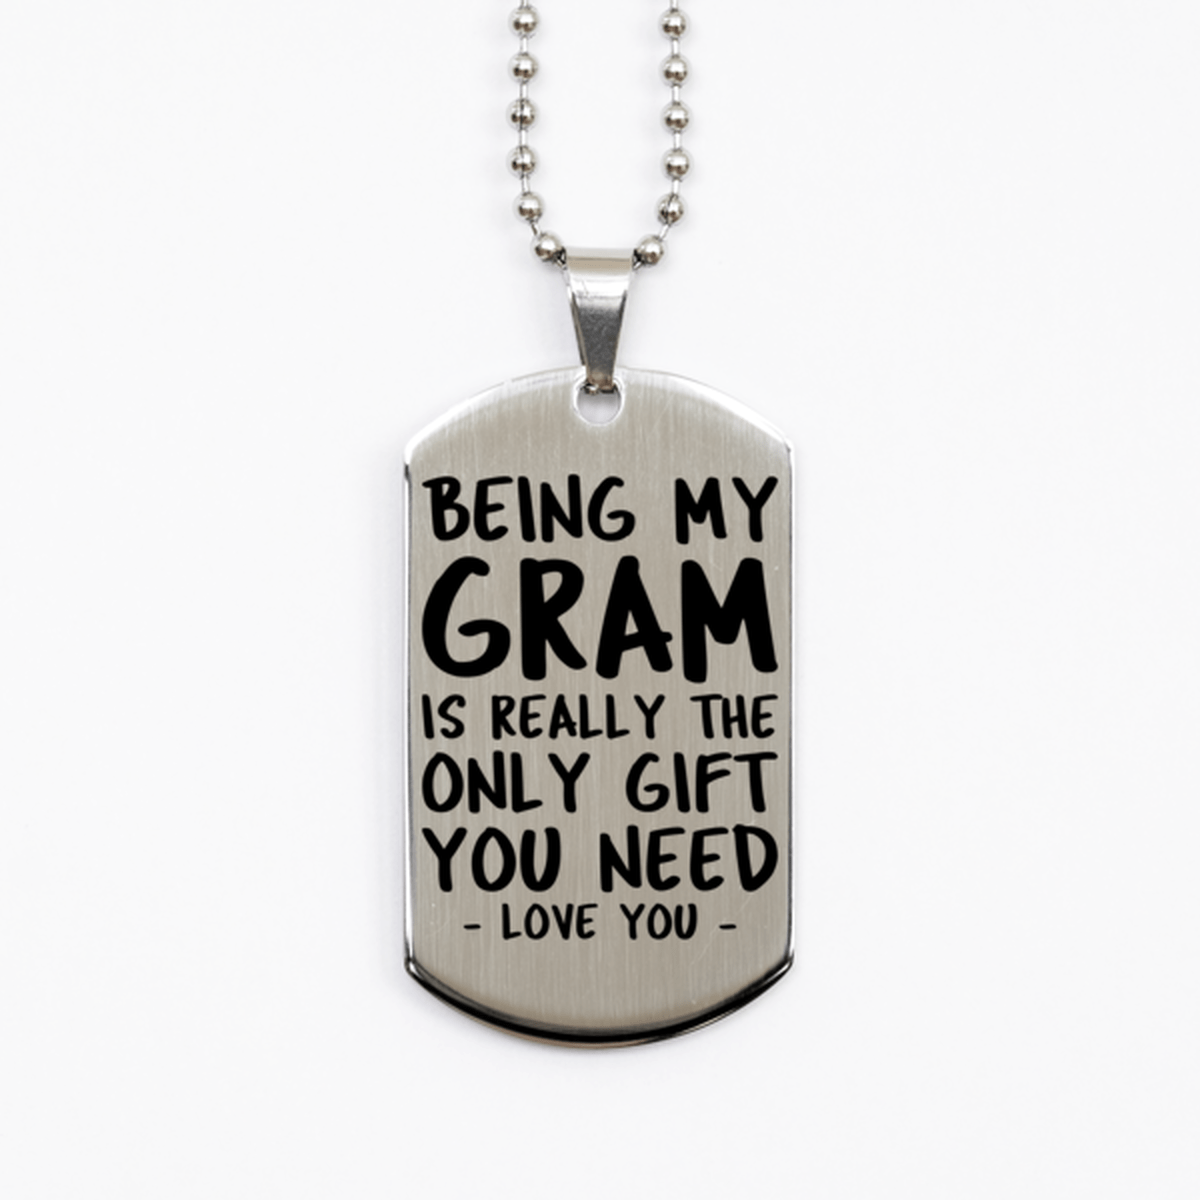 Funny Gram Silver Dog Tag Necklace, Being My Gram Is Really the Only Gift You Need, Best Birthday Gifts for Gram